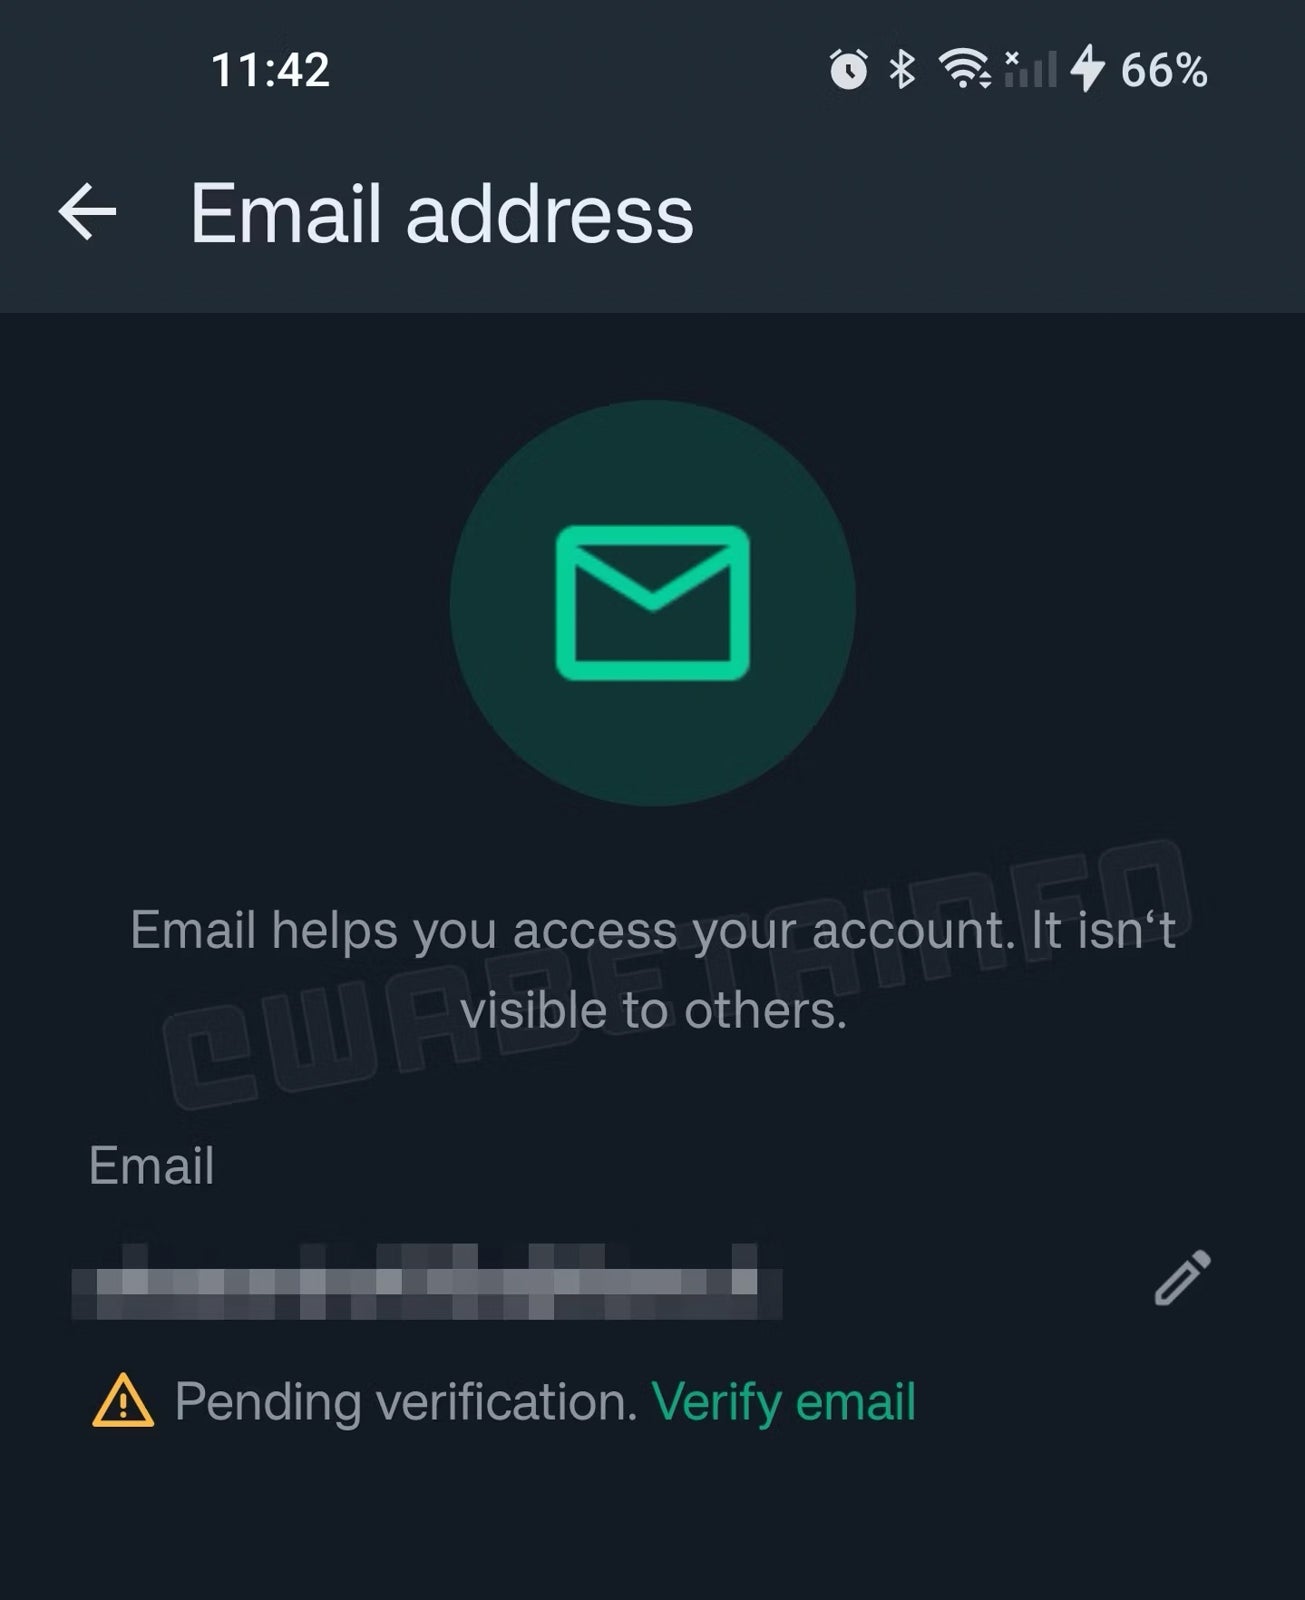 WhatsApp email verification feature in the works; reaches more beta testers on Android